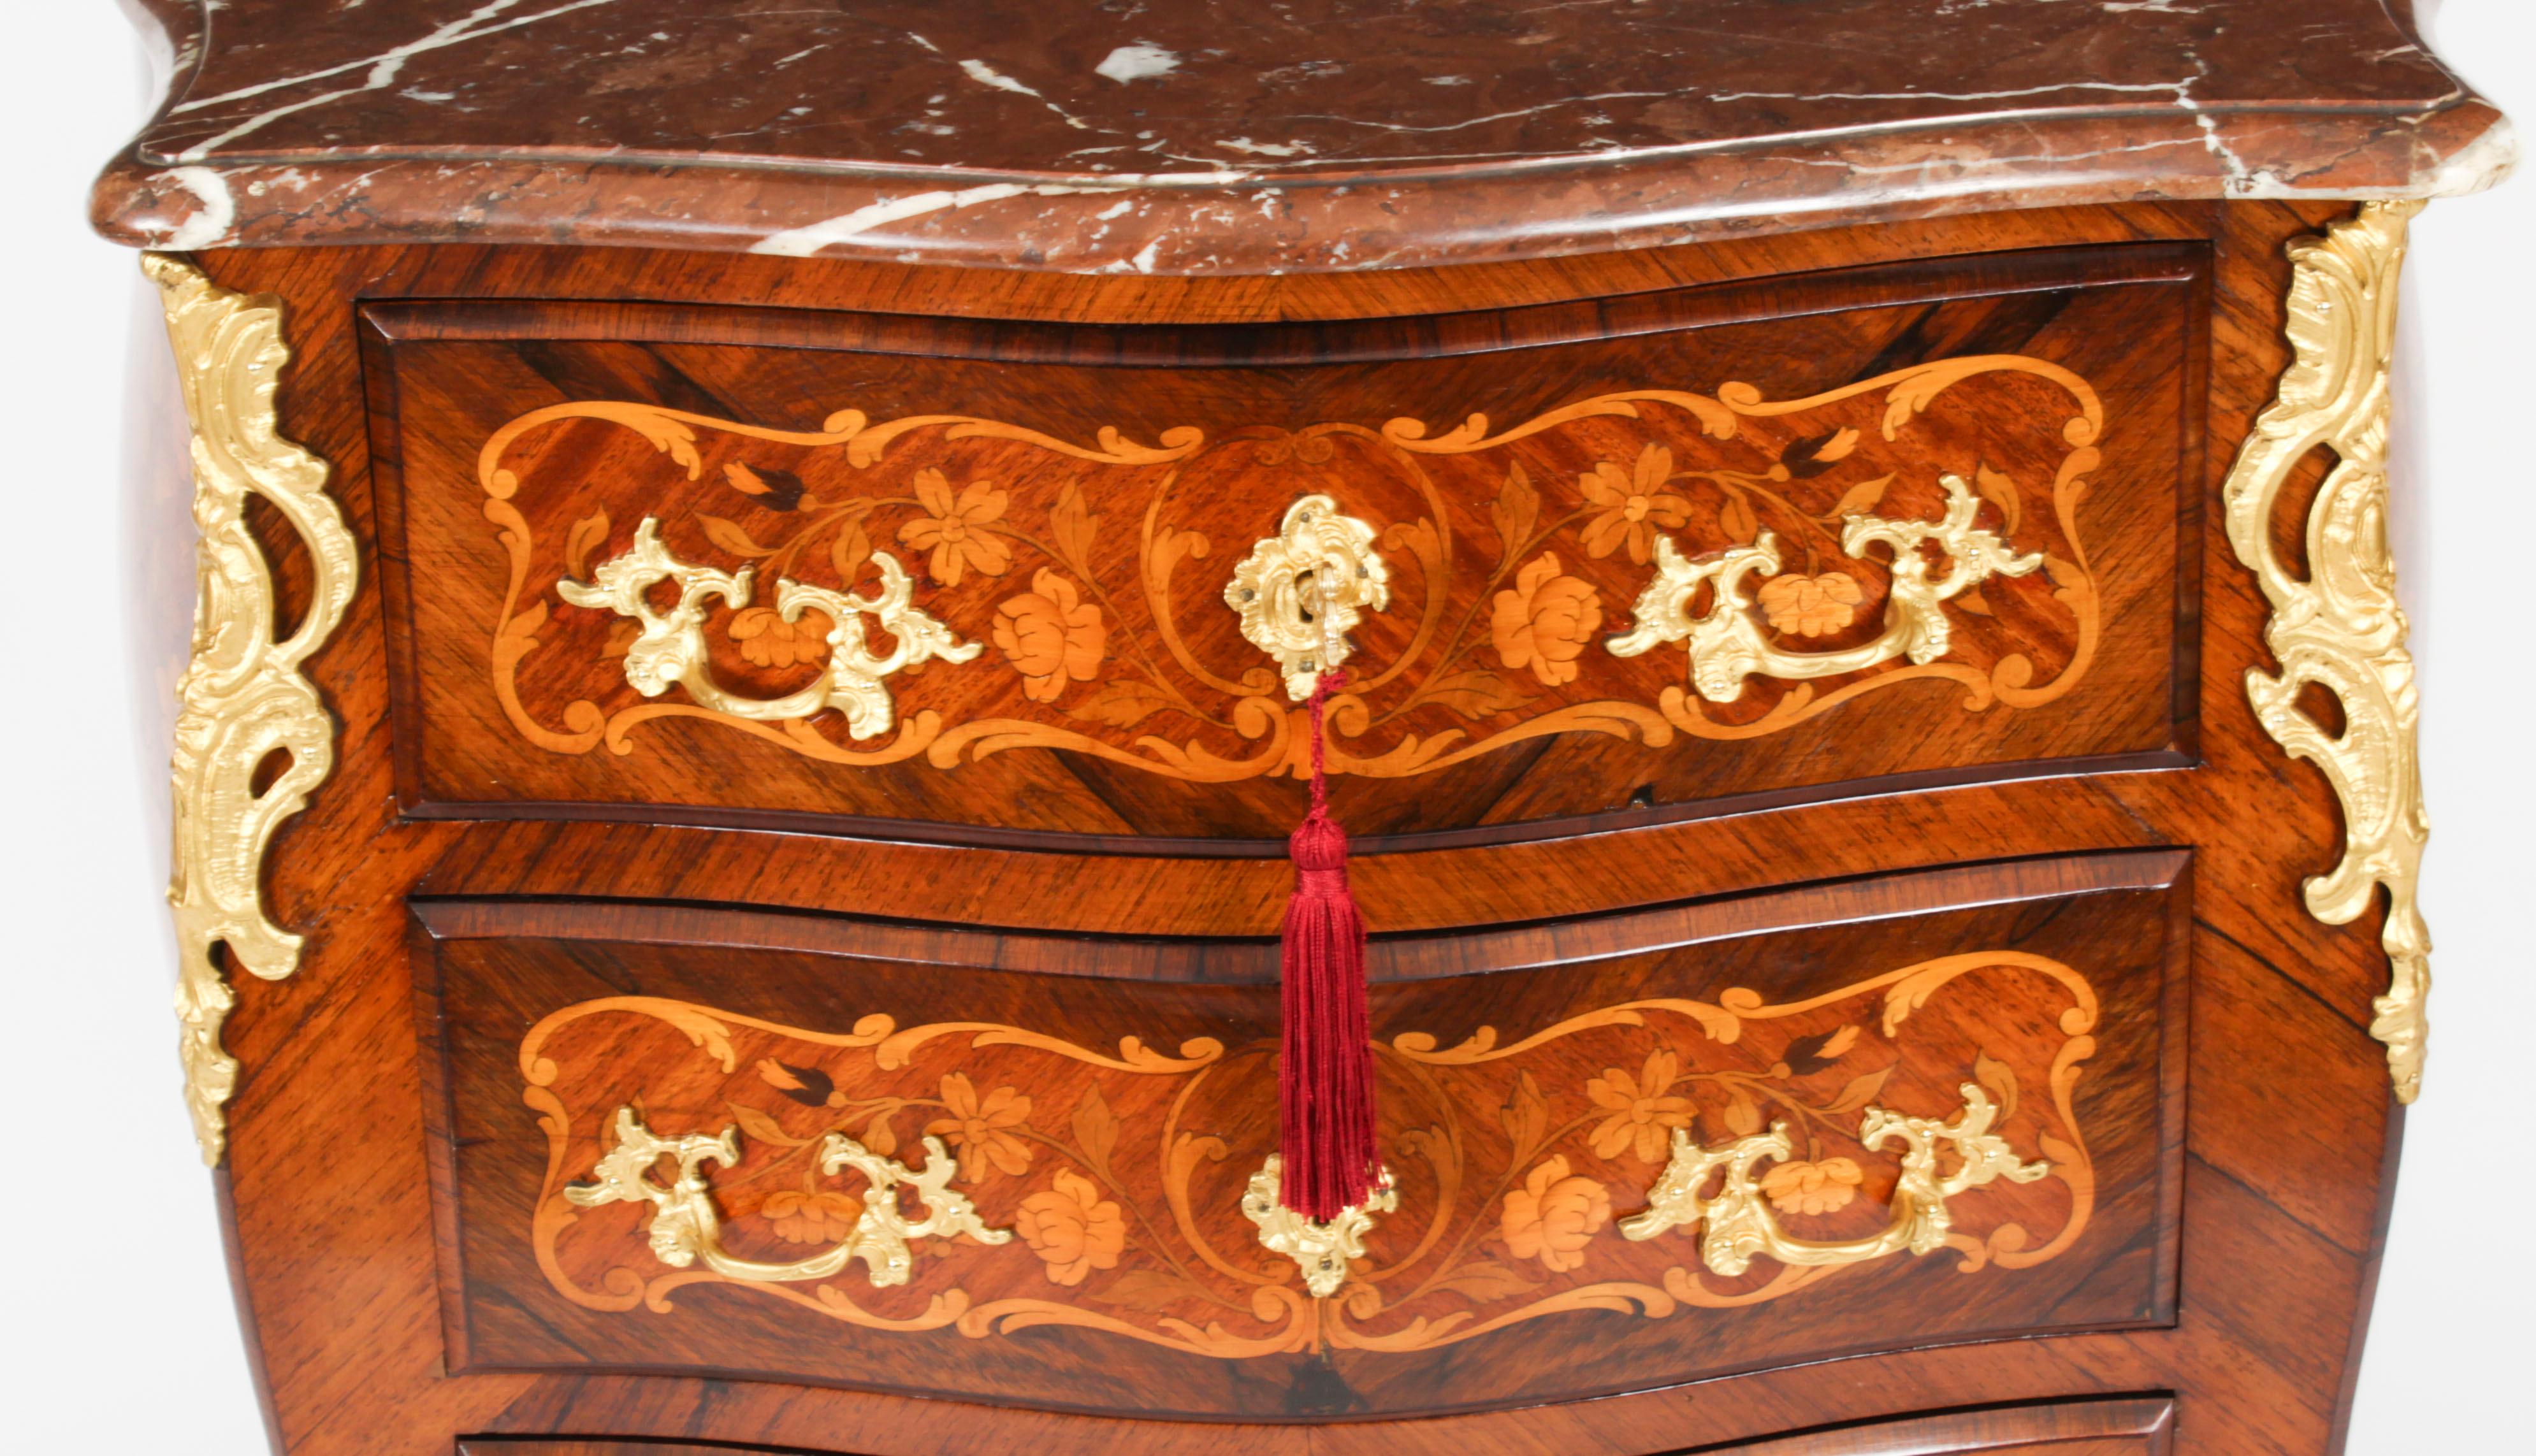 Ormolu Antique French Louis Revival Gonçalo Alvest Marquetry Commode 19th Century For Sale